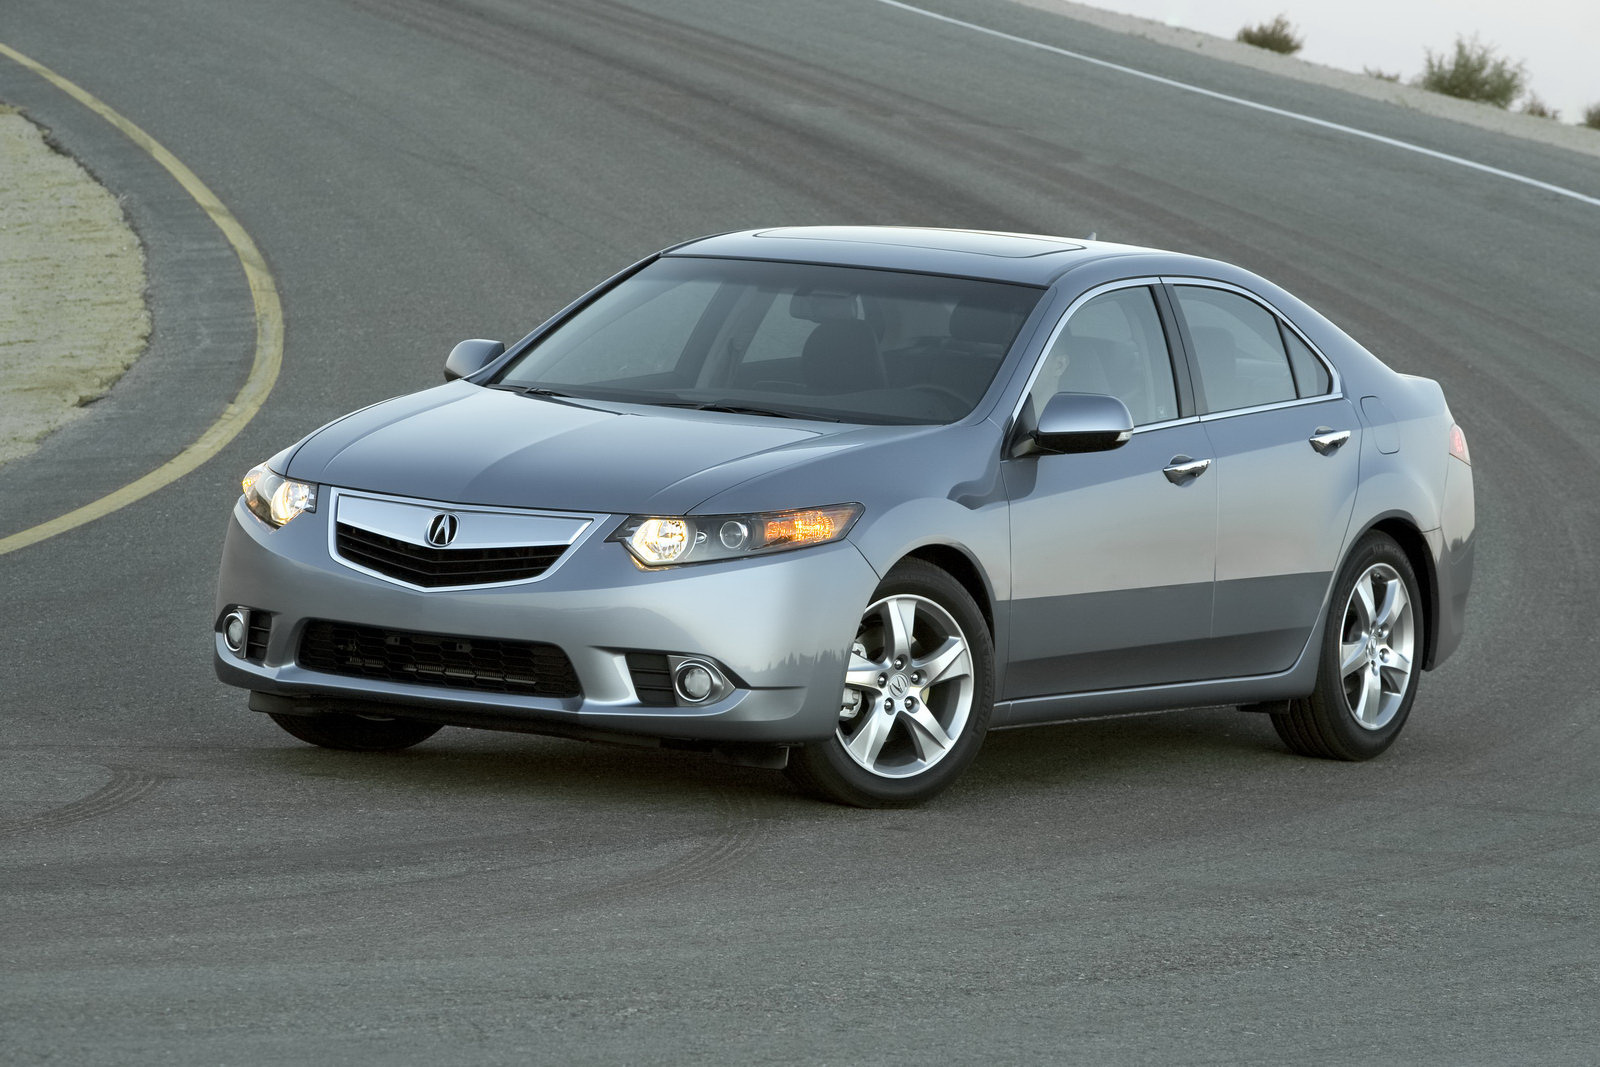 LA Show Preview: Acura freshens up 2011 TSX Sedan | Carscoops